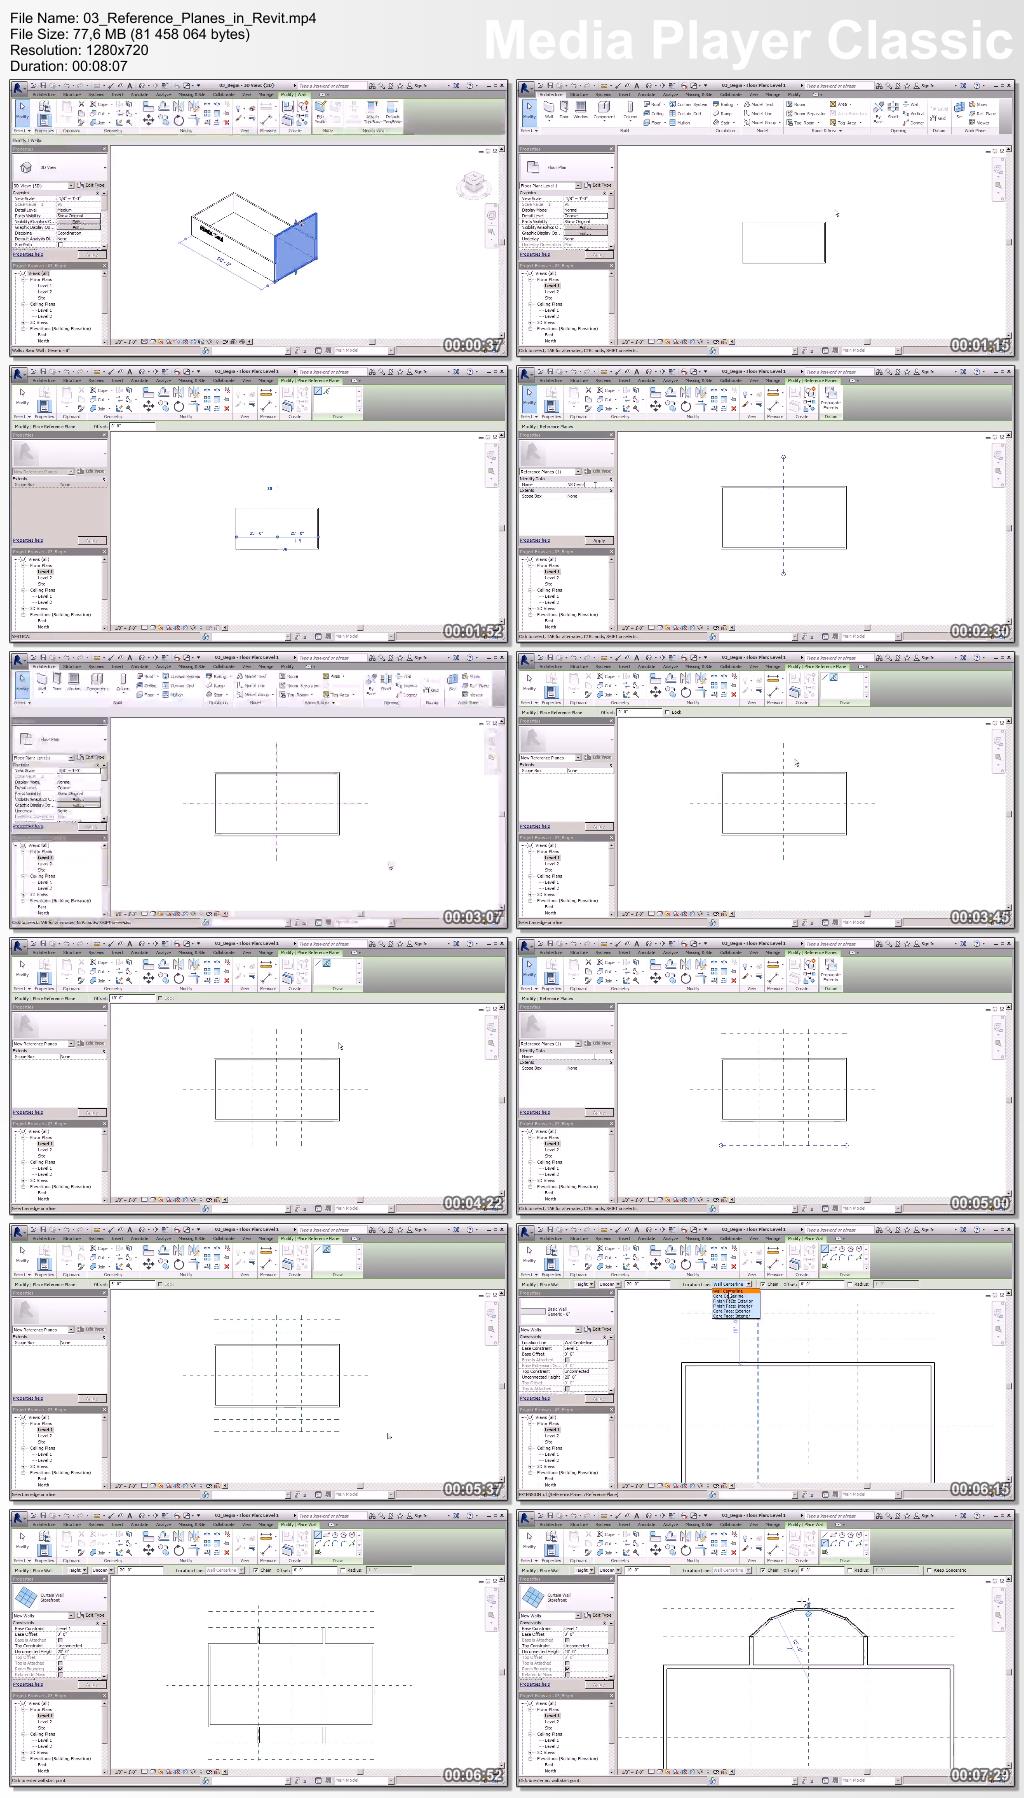 Dixxl Tuxxs - Work Planes and Reference Planes in Revit